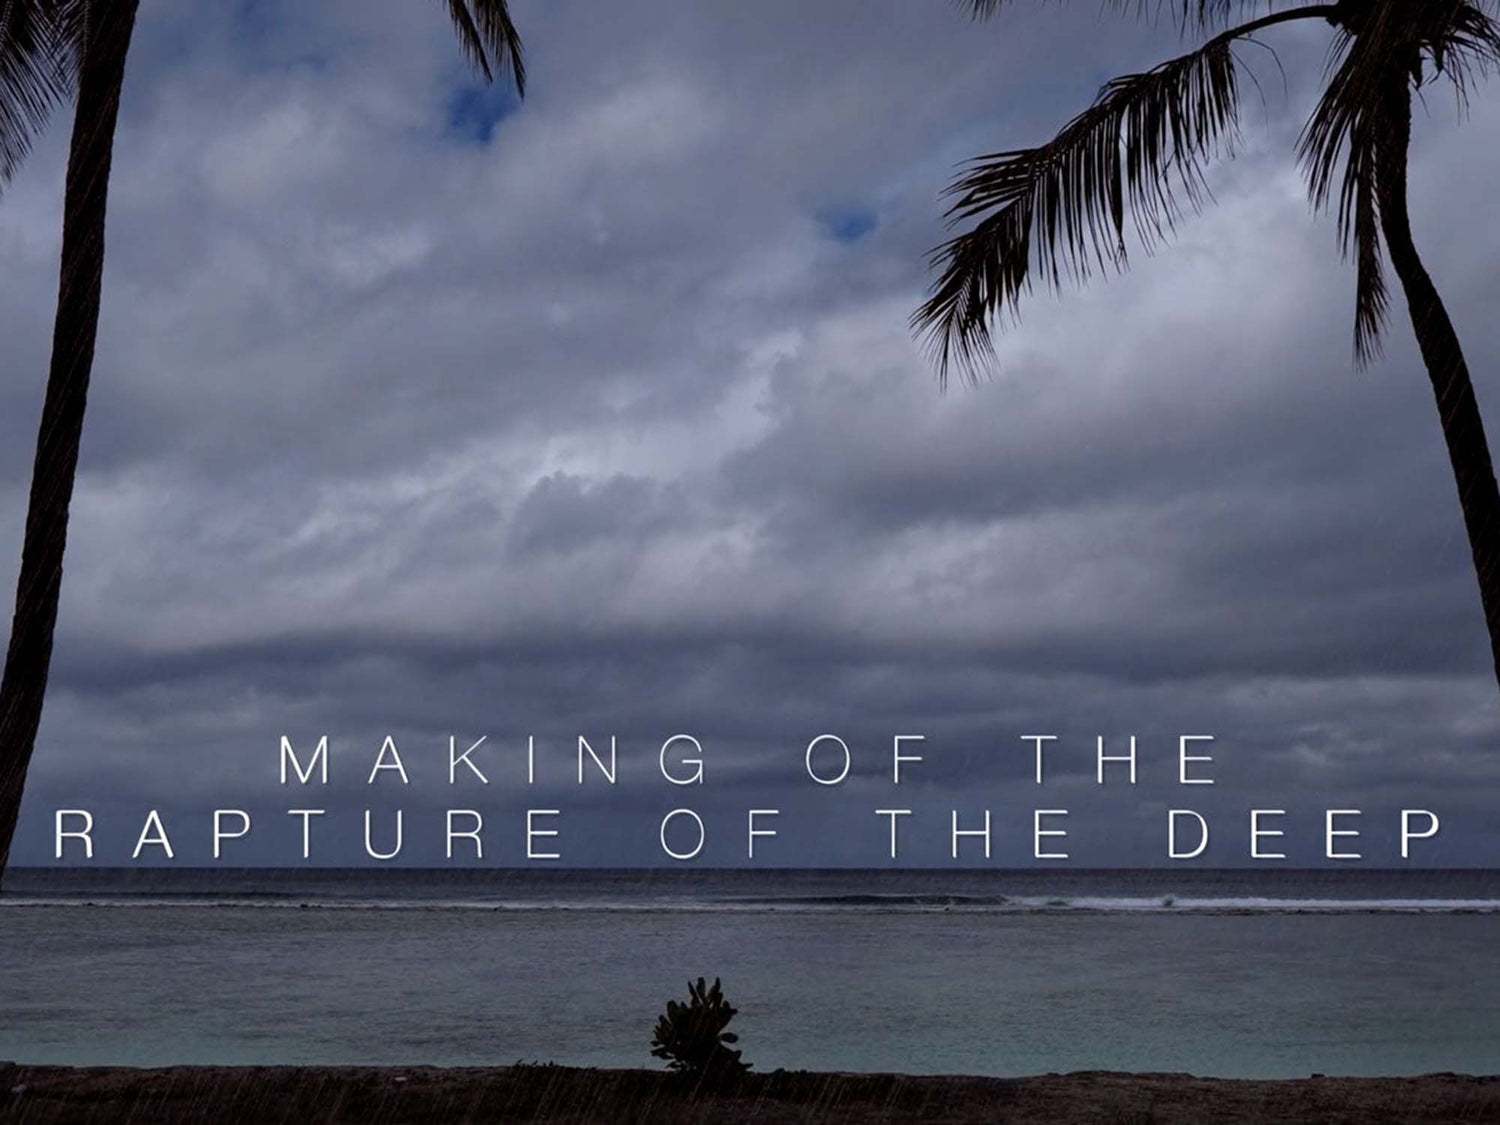 The Making of The Rapture of the Deep with the Panasonic GH5 [VIDEO]